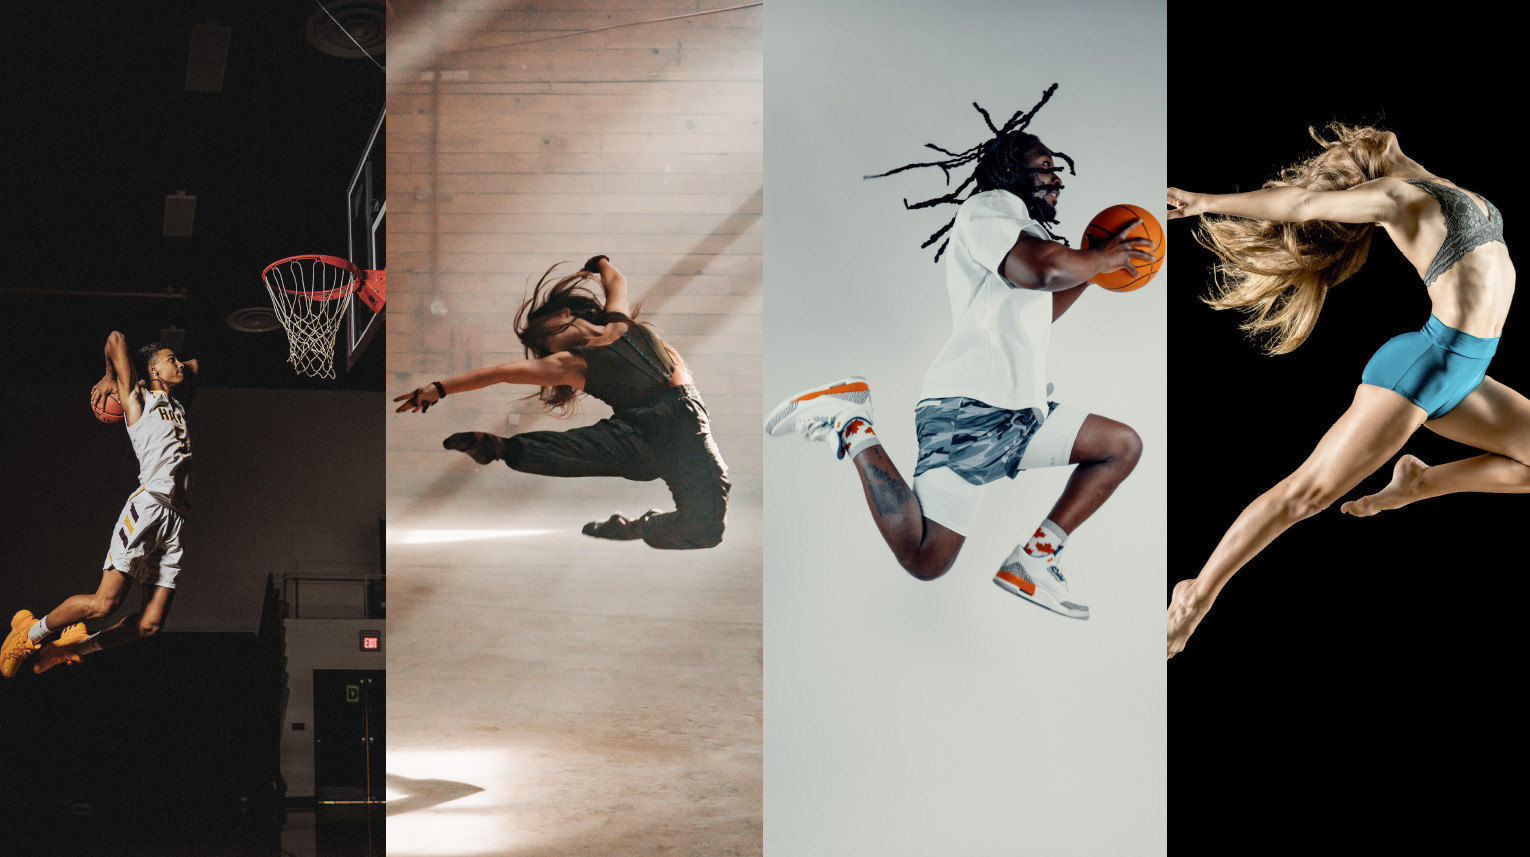 Two basketball players and two dancers jumping in poses